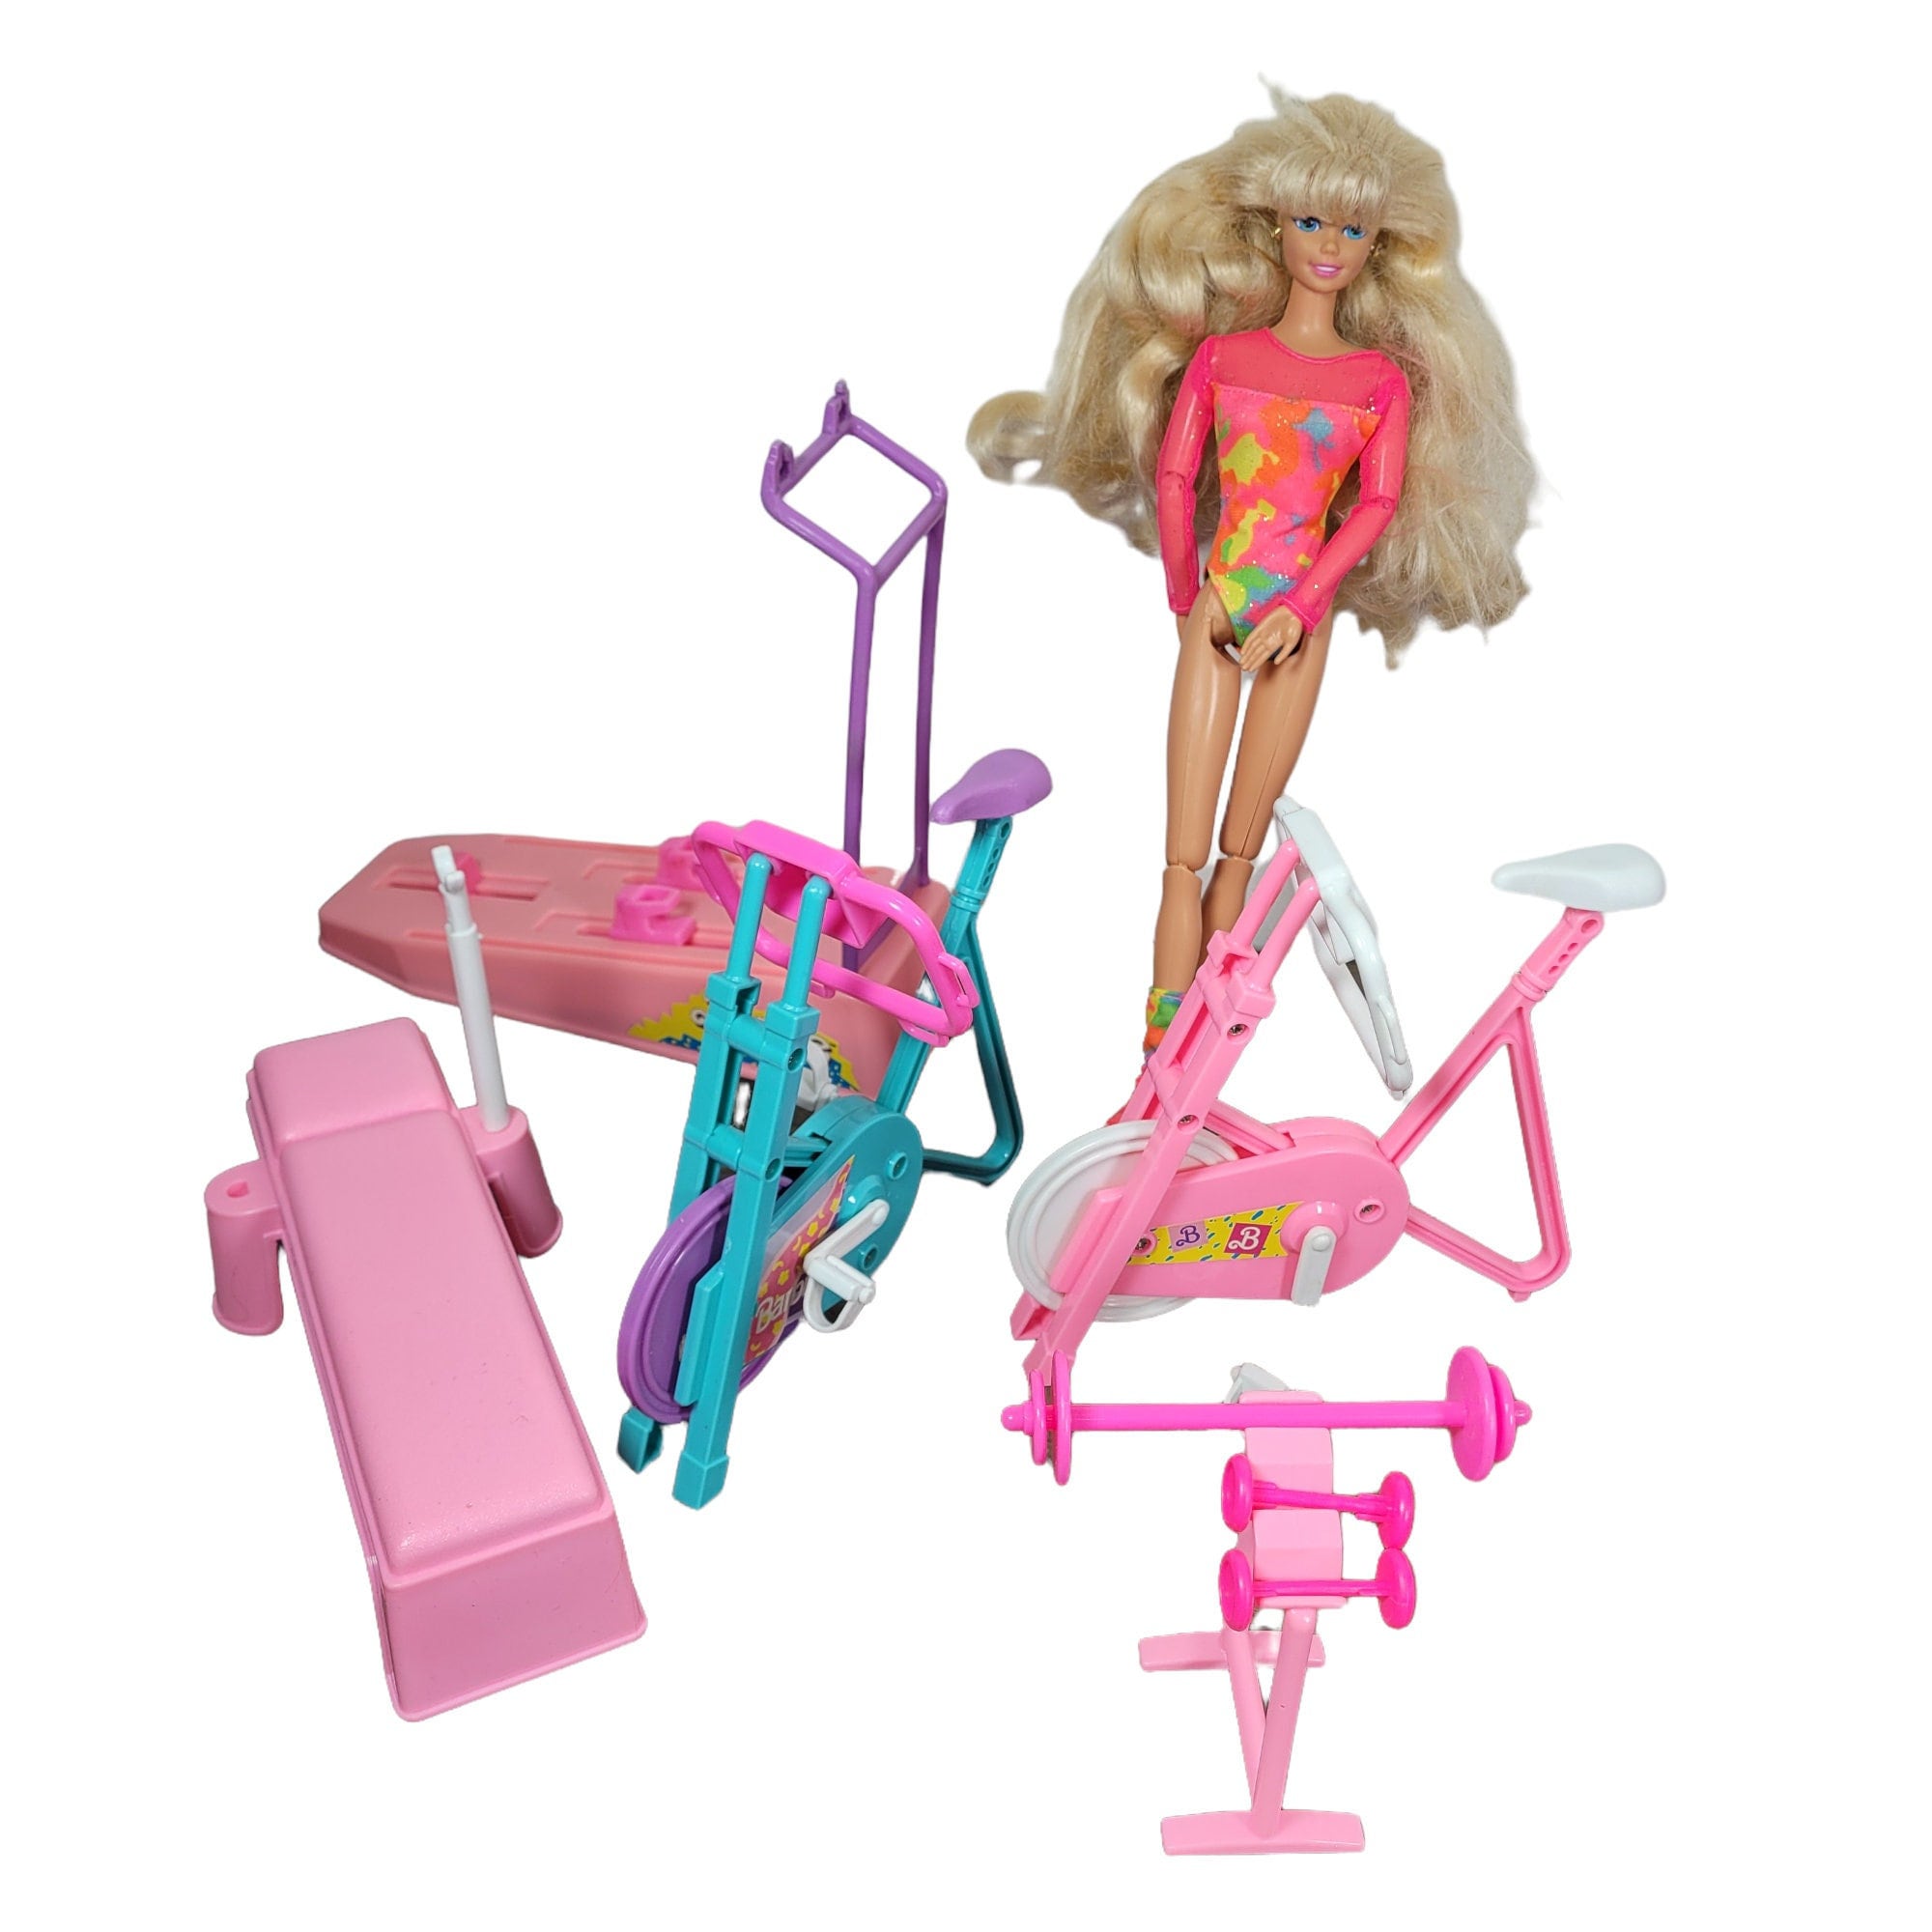 Barbie Workout Center Fitness Gym Play Set With Doll 1984 Mattel Vintage B6  